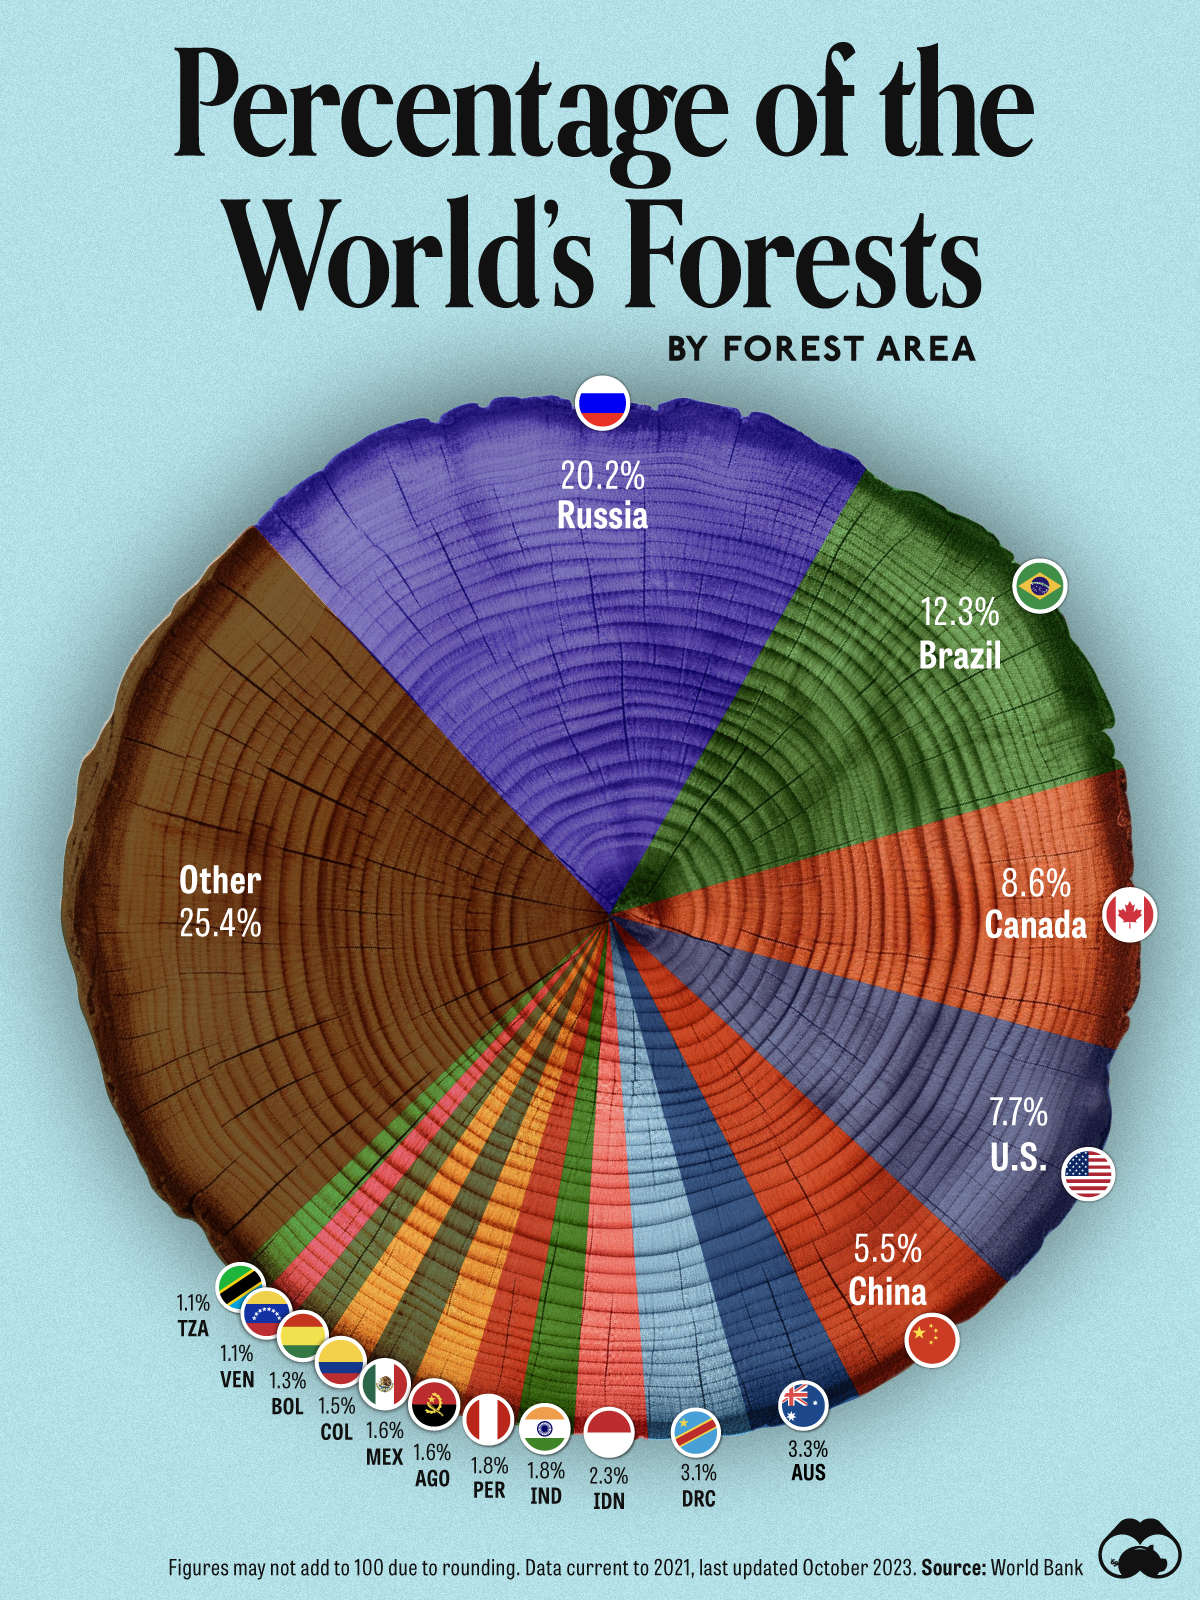 A pie chart showing the share of world forest by country.